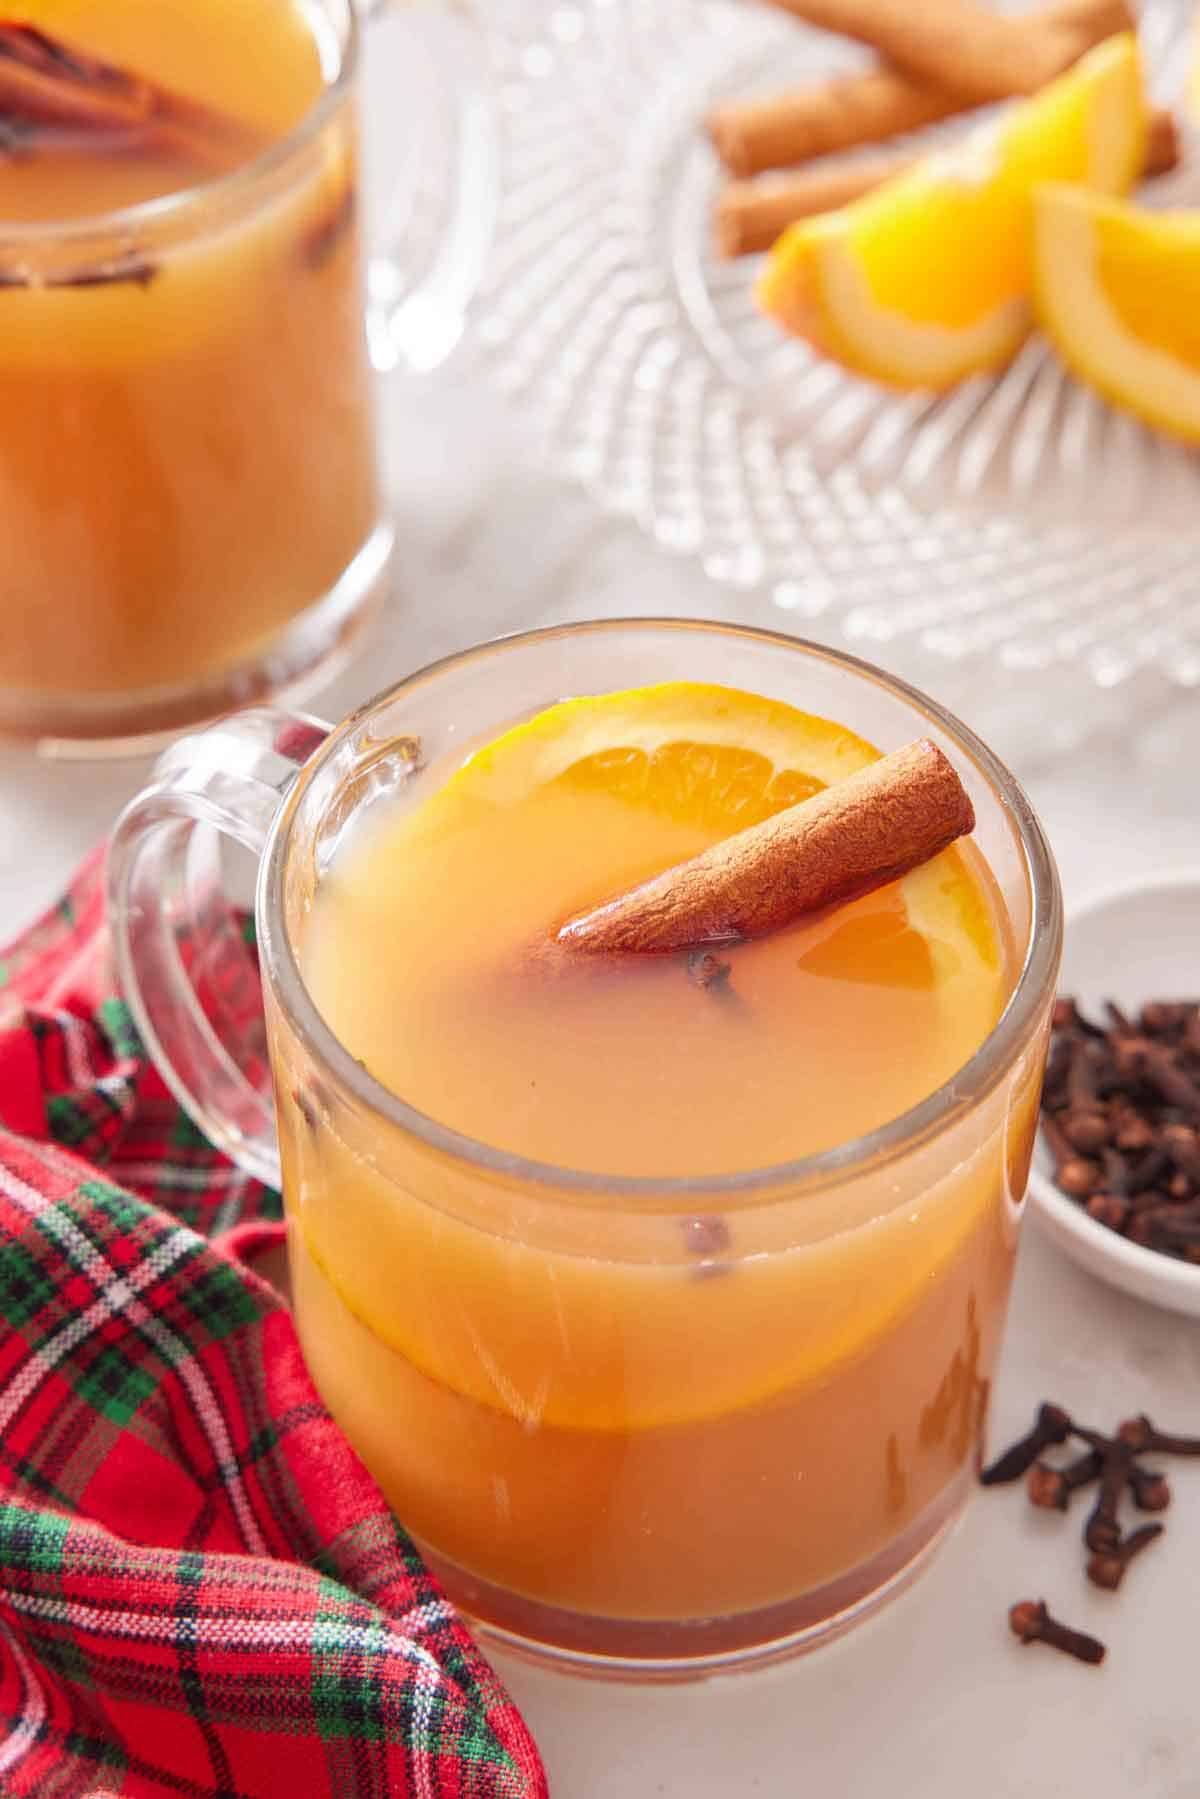 A glass of wassail with a cinnamon stick and slice of orange. A linen, cloves, cut oranges, and another glass of wassail off to the side.